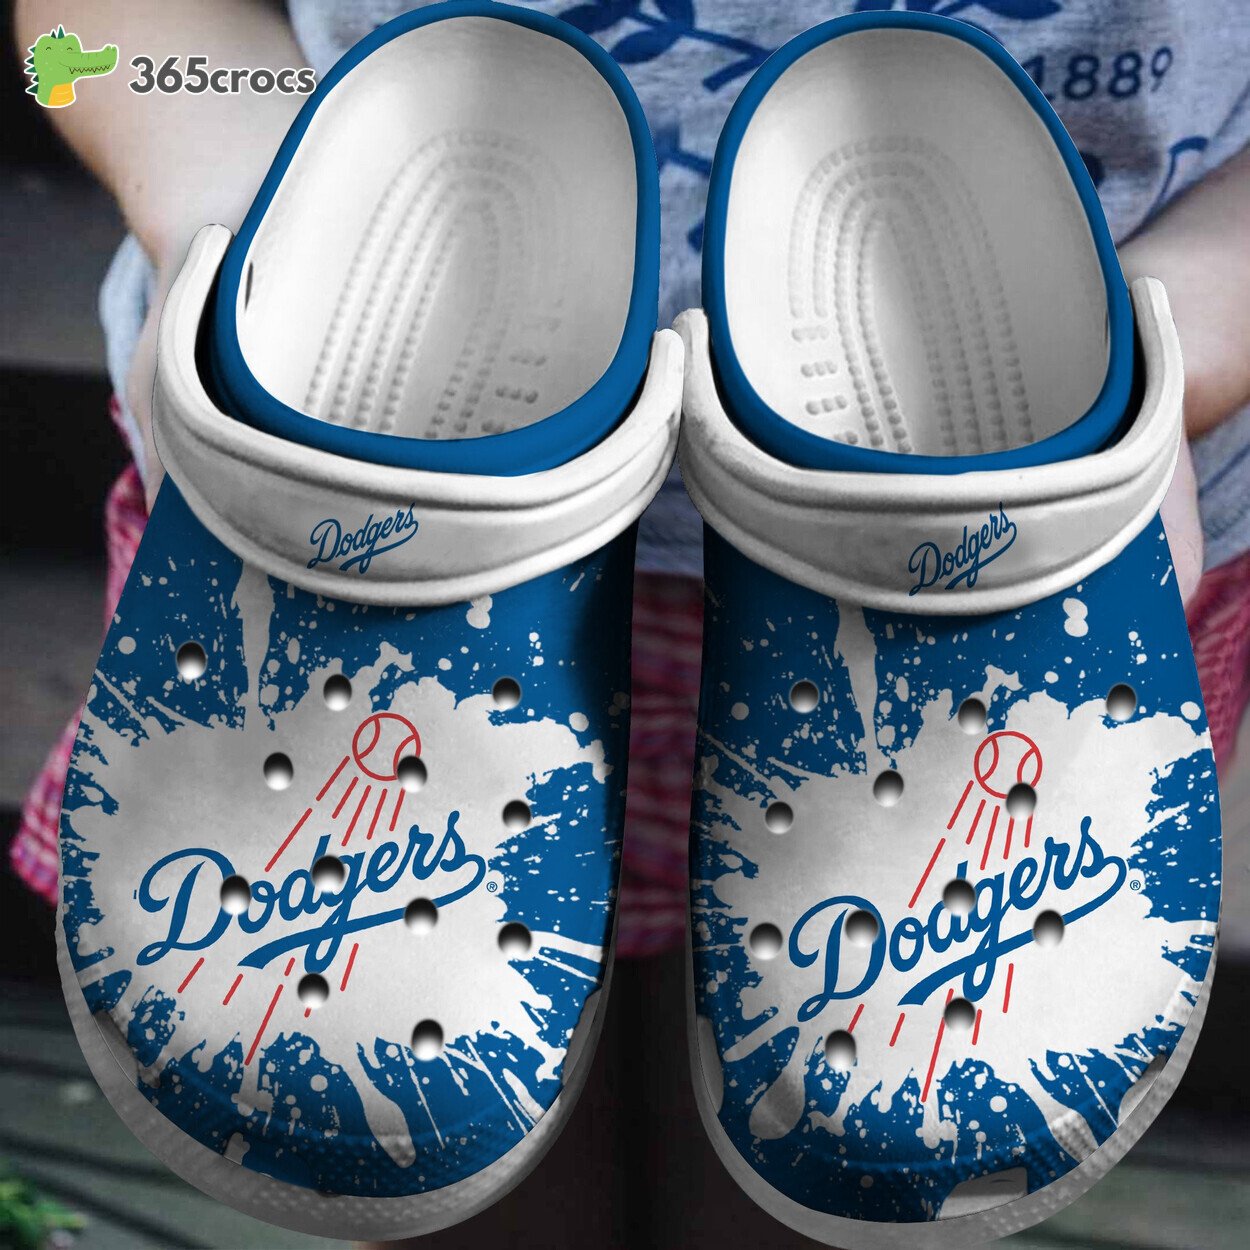 Los Angeles Dodgers Baseball Personalized Name Team Comfort Crocss Clogs